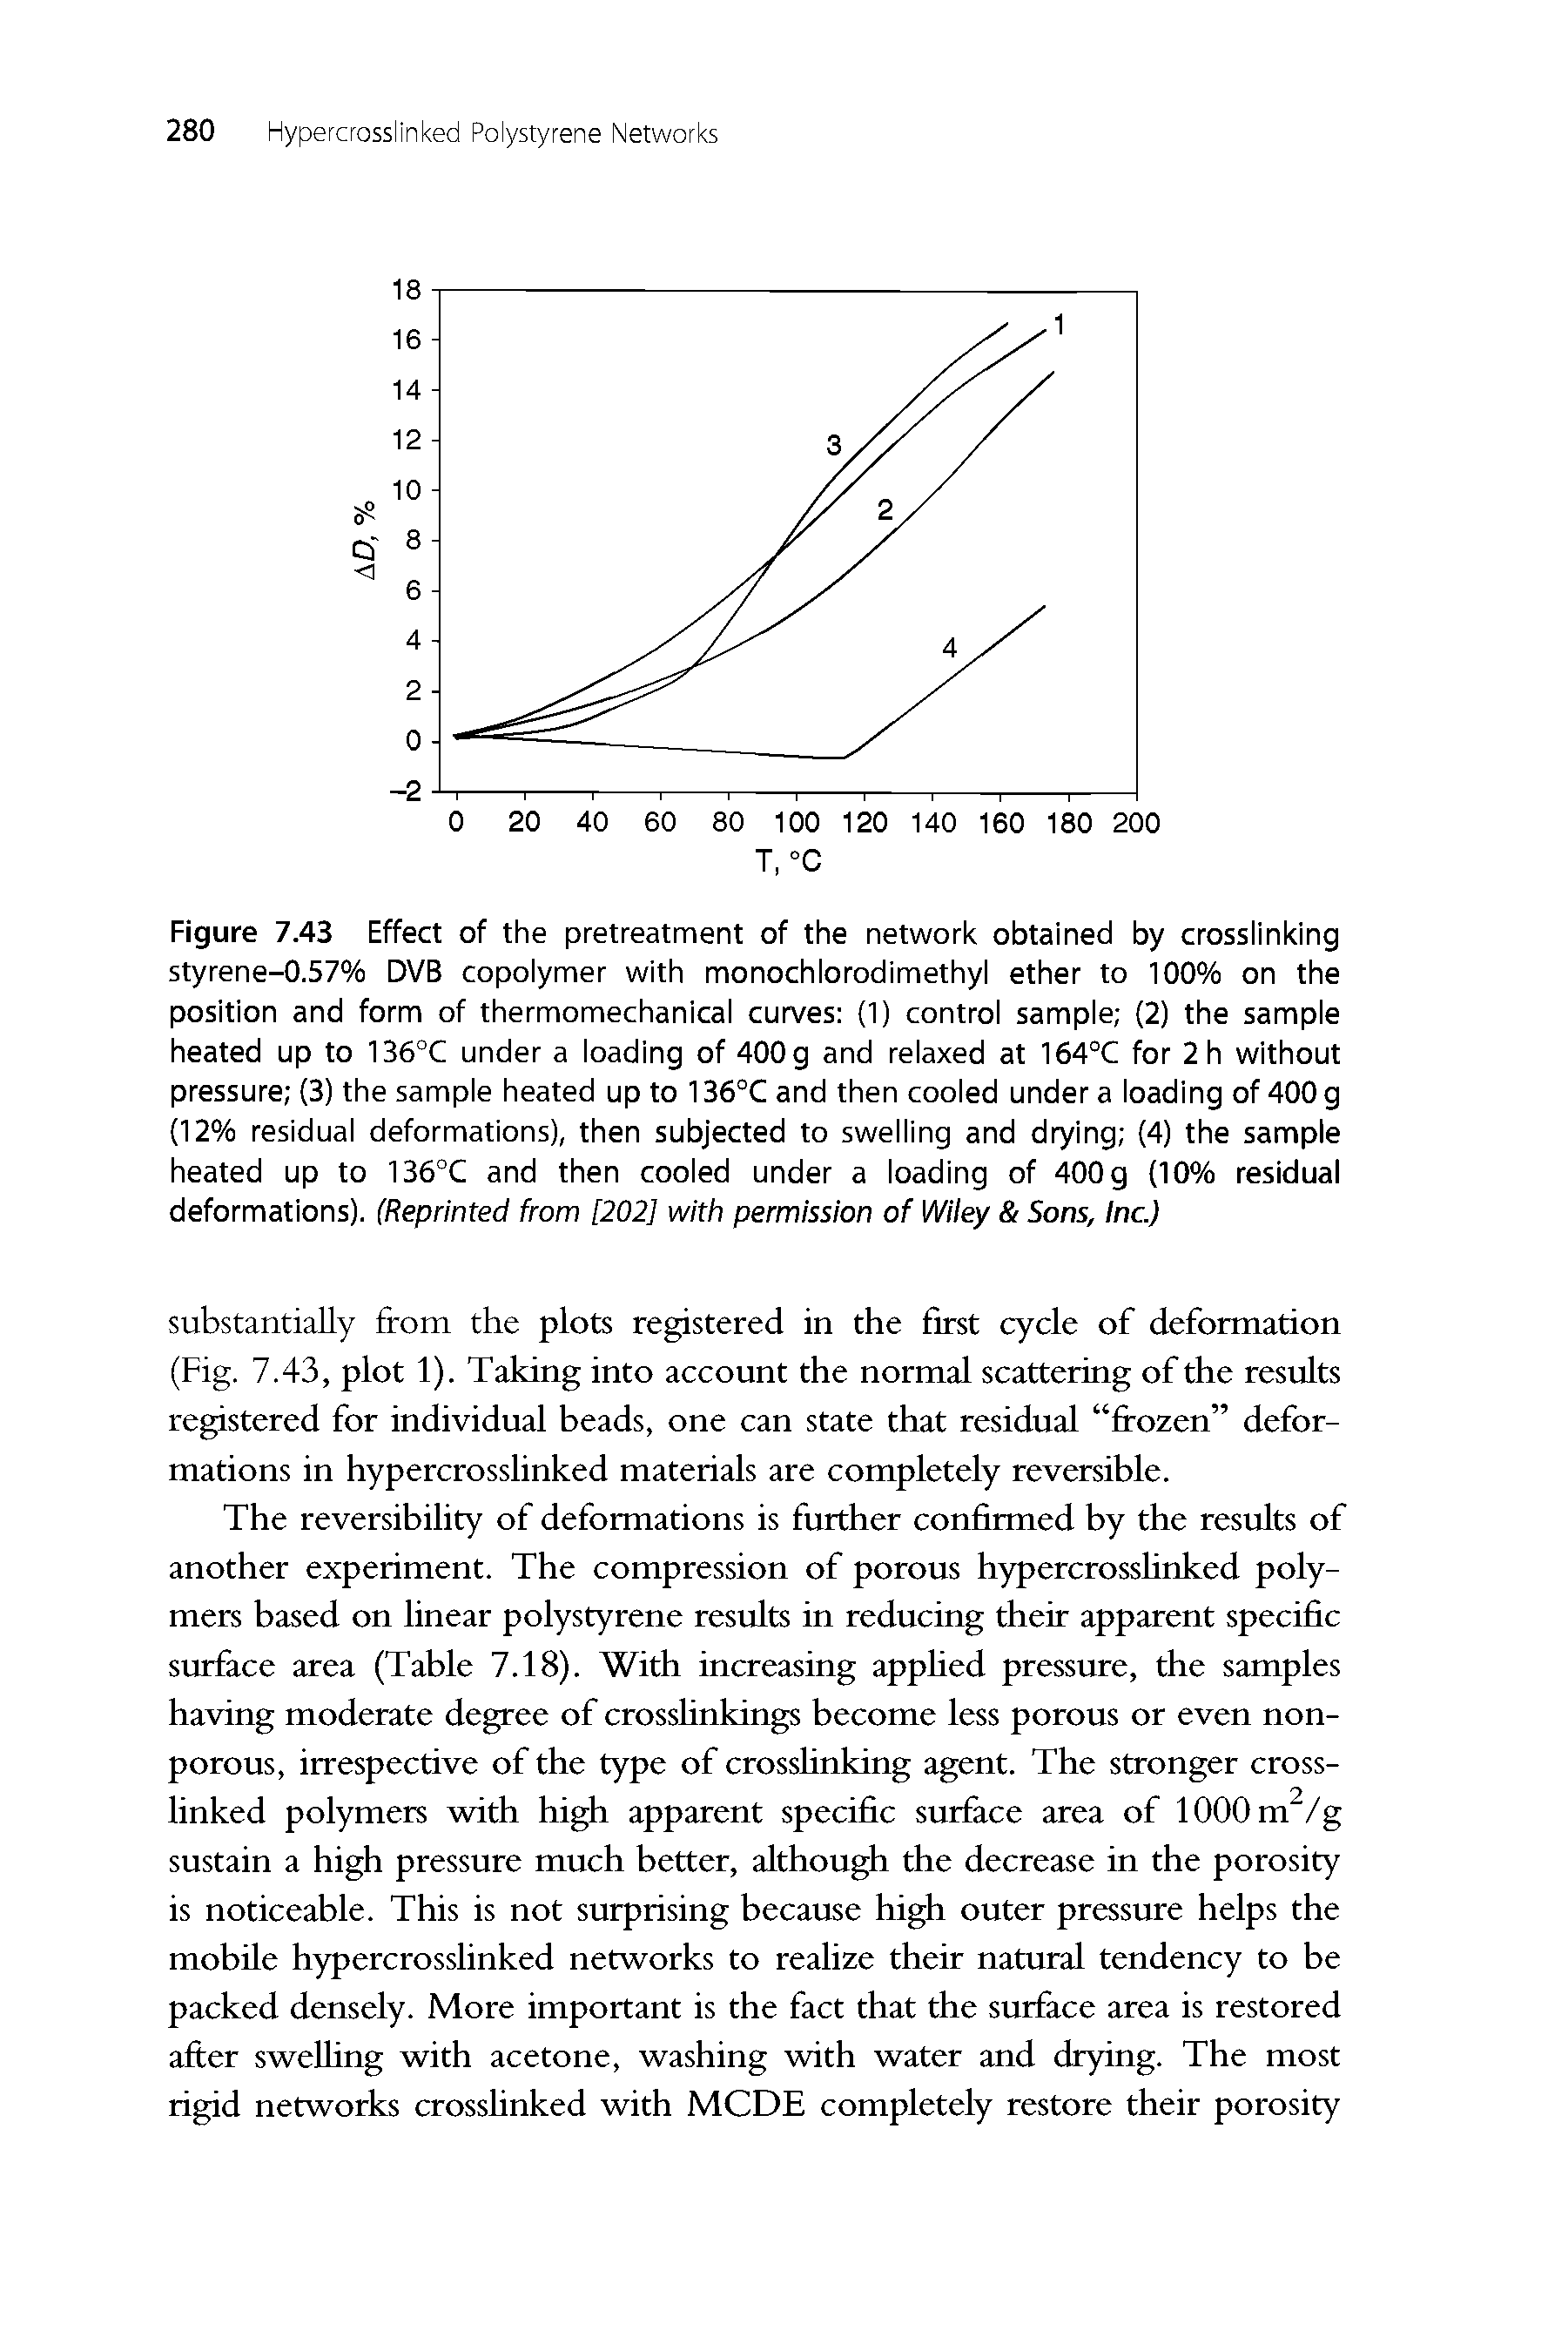 Figure 7.43 Effect of the pretreatment of the network obtained by crosslinking styrene-0.57% DVB copolymer with monochlorodimethyl ether to 100% on the position and form of thermomechanical curves (1) control sample (2) the sample heated up to 136°C under a loading of 400 g and relaxed at 164°C for 2h without pressure (3) the sample heated up to 136°C and then cooled under a loading of 400g (12% residual deformations), then subjected to swelling and drying (4) the sample heated up to 136°C and then cooled under a loading of 400 g (10% residual deformations). (Reprinted from [202] with permission of Wiley Sons, Inc.)...